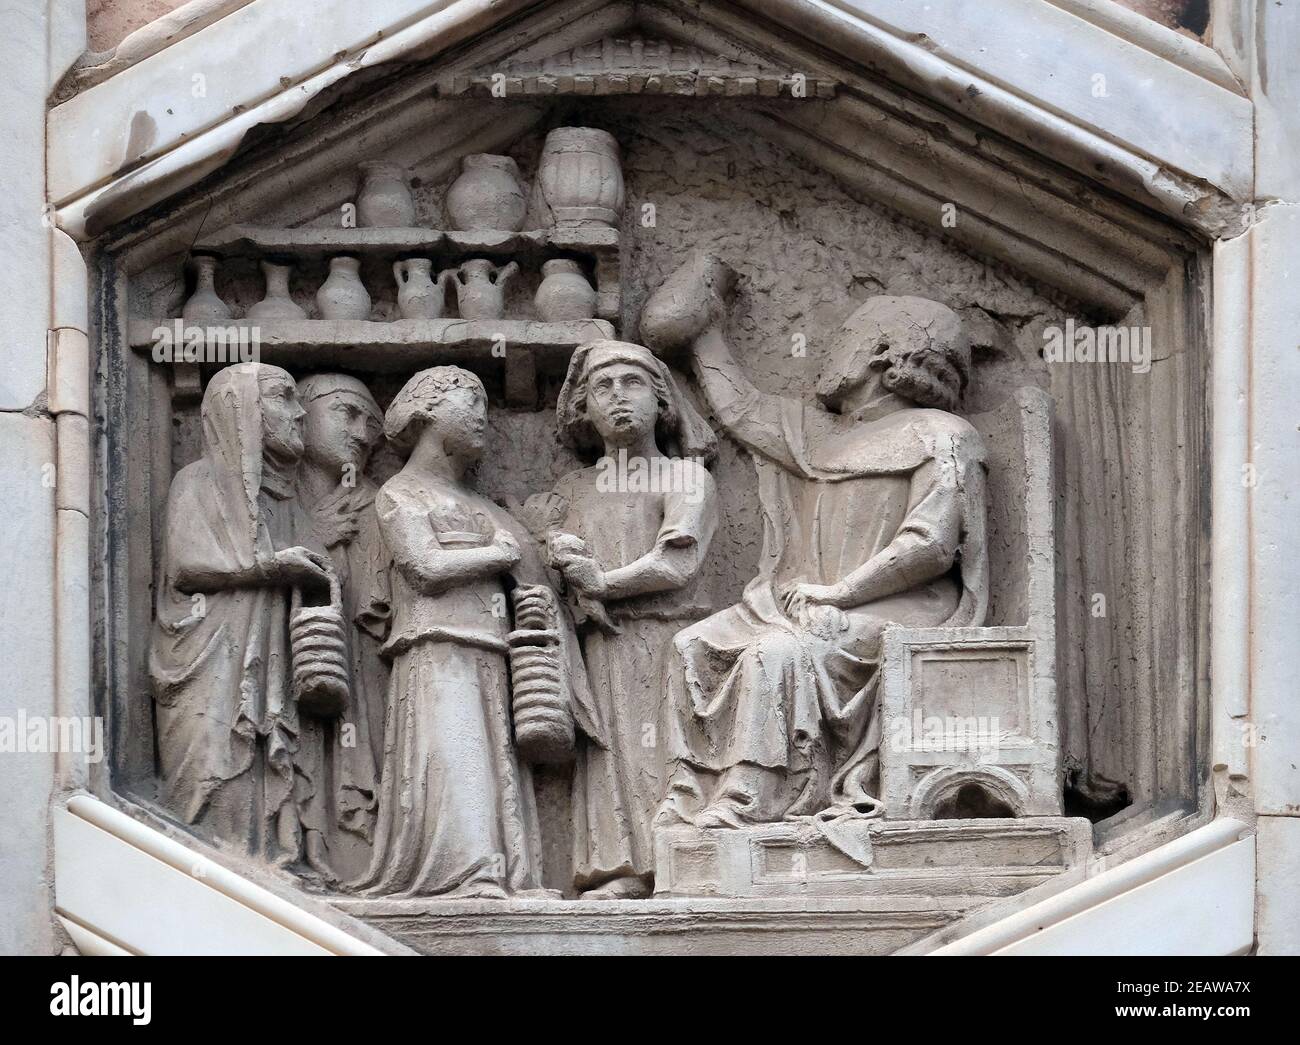 Allegory of medicine from the workshop of Andrea Pisano, Relief on Giotto Campanile of Cattedrale di Santa Maria del Fiore (Cathedral of Saint Mary of the Flower), Florence, Italy Stock Photo